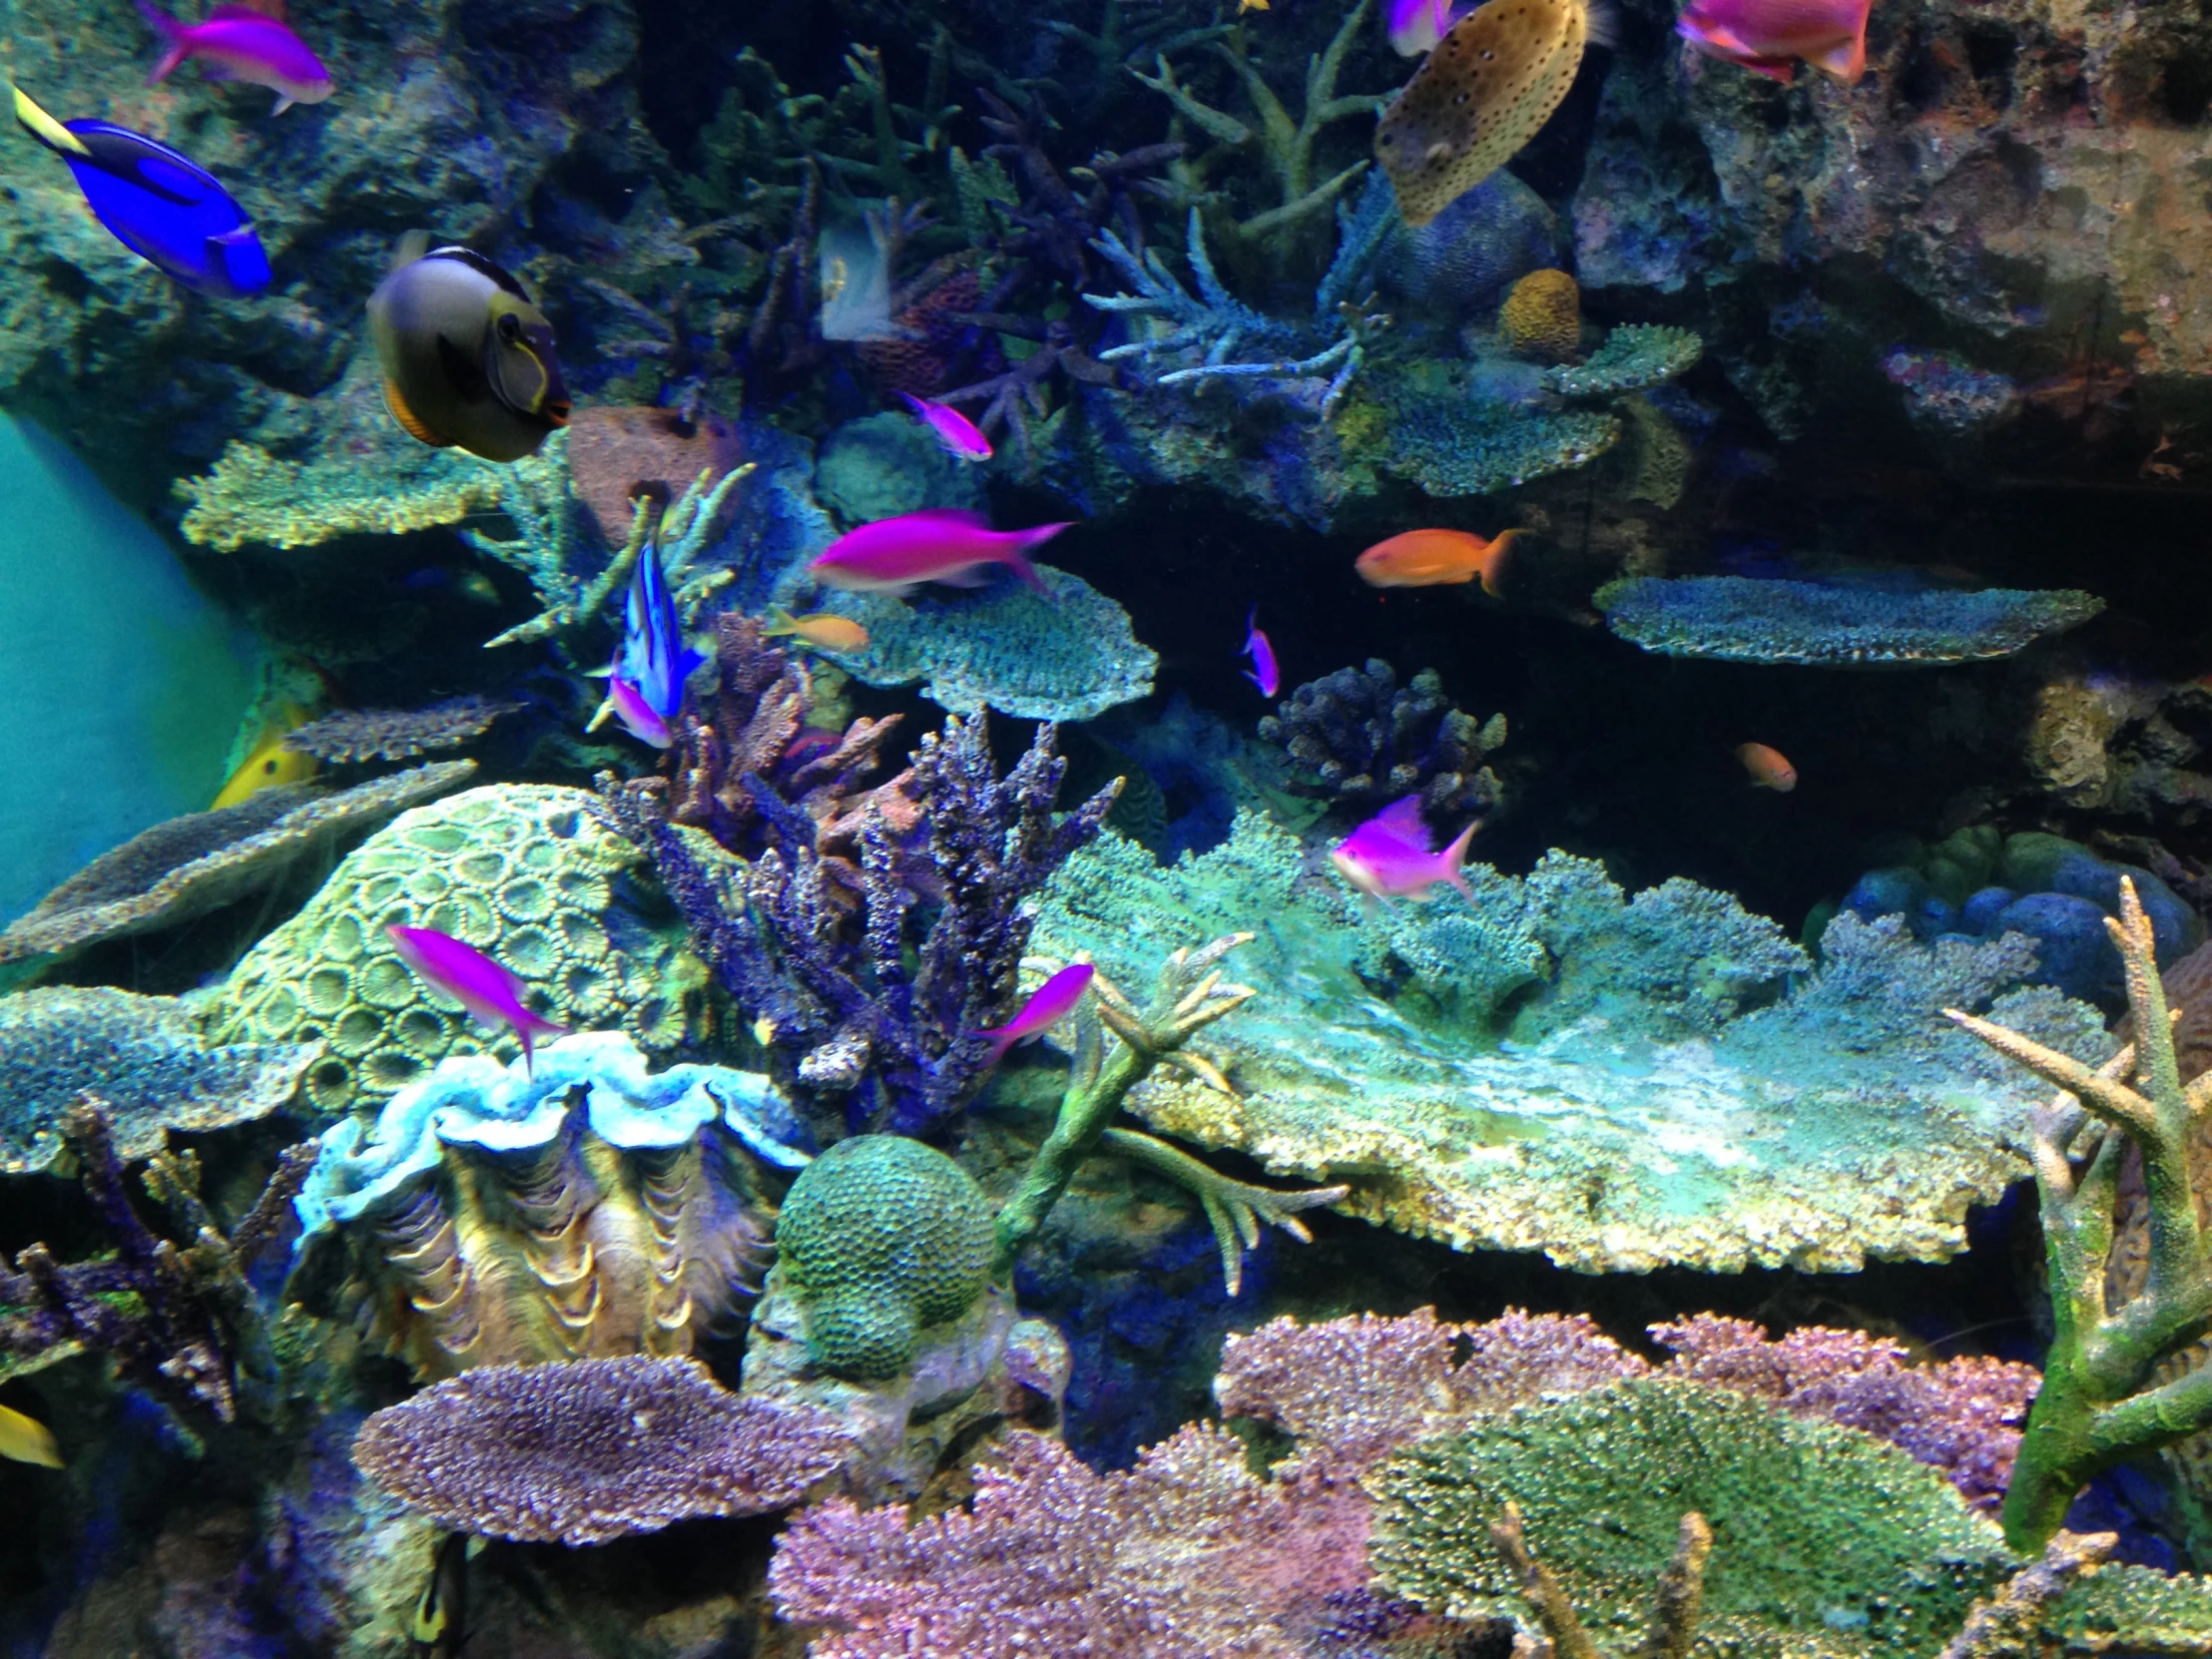 there is an aquarium full of many different colored fish